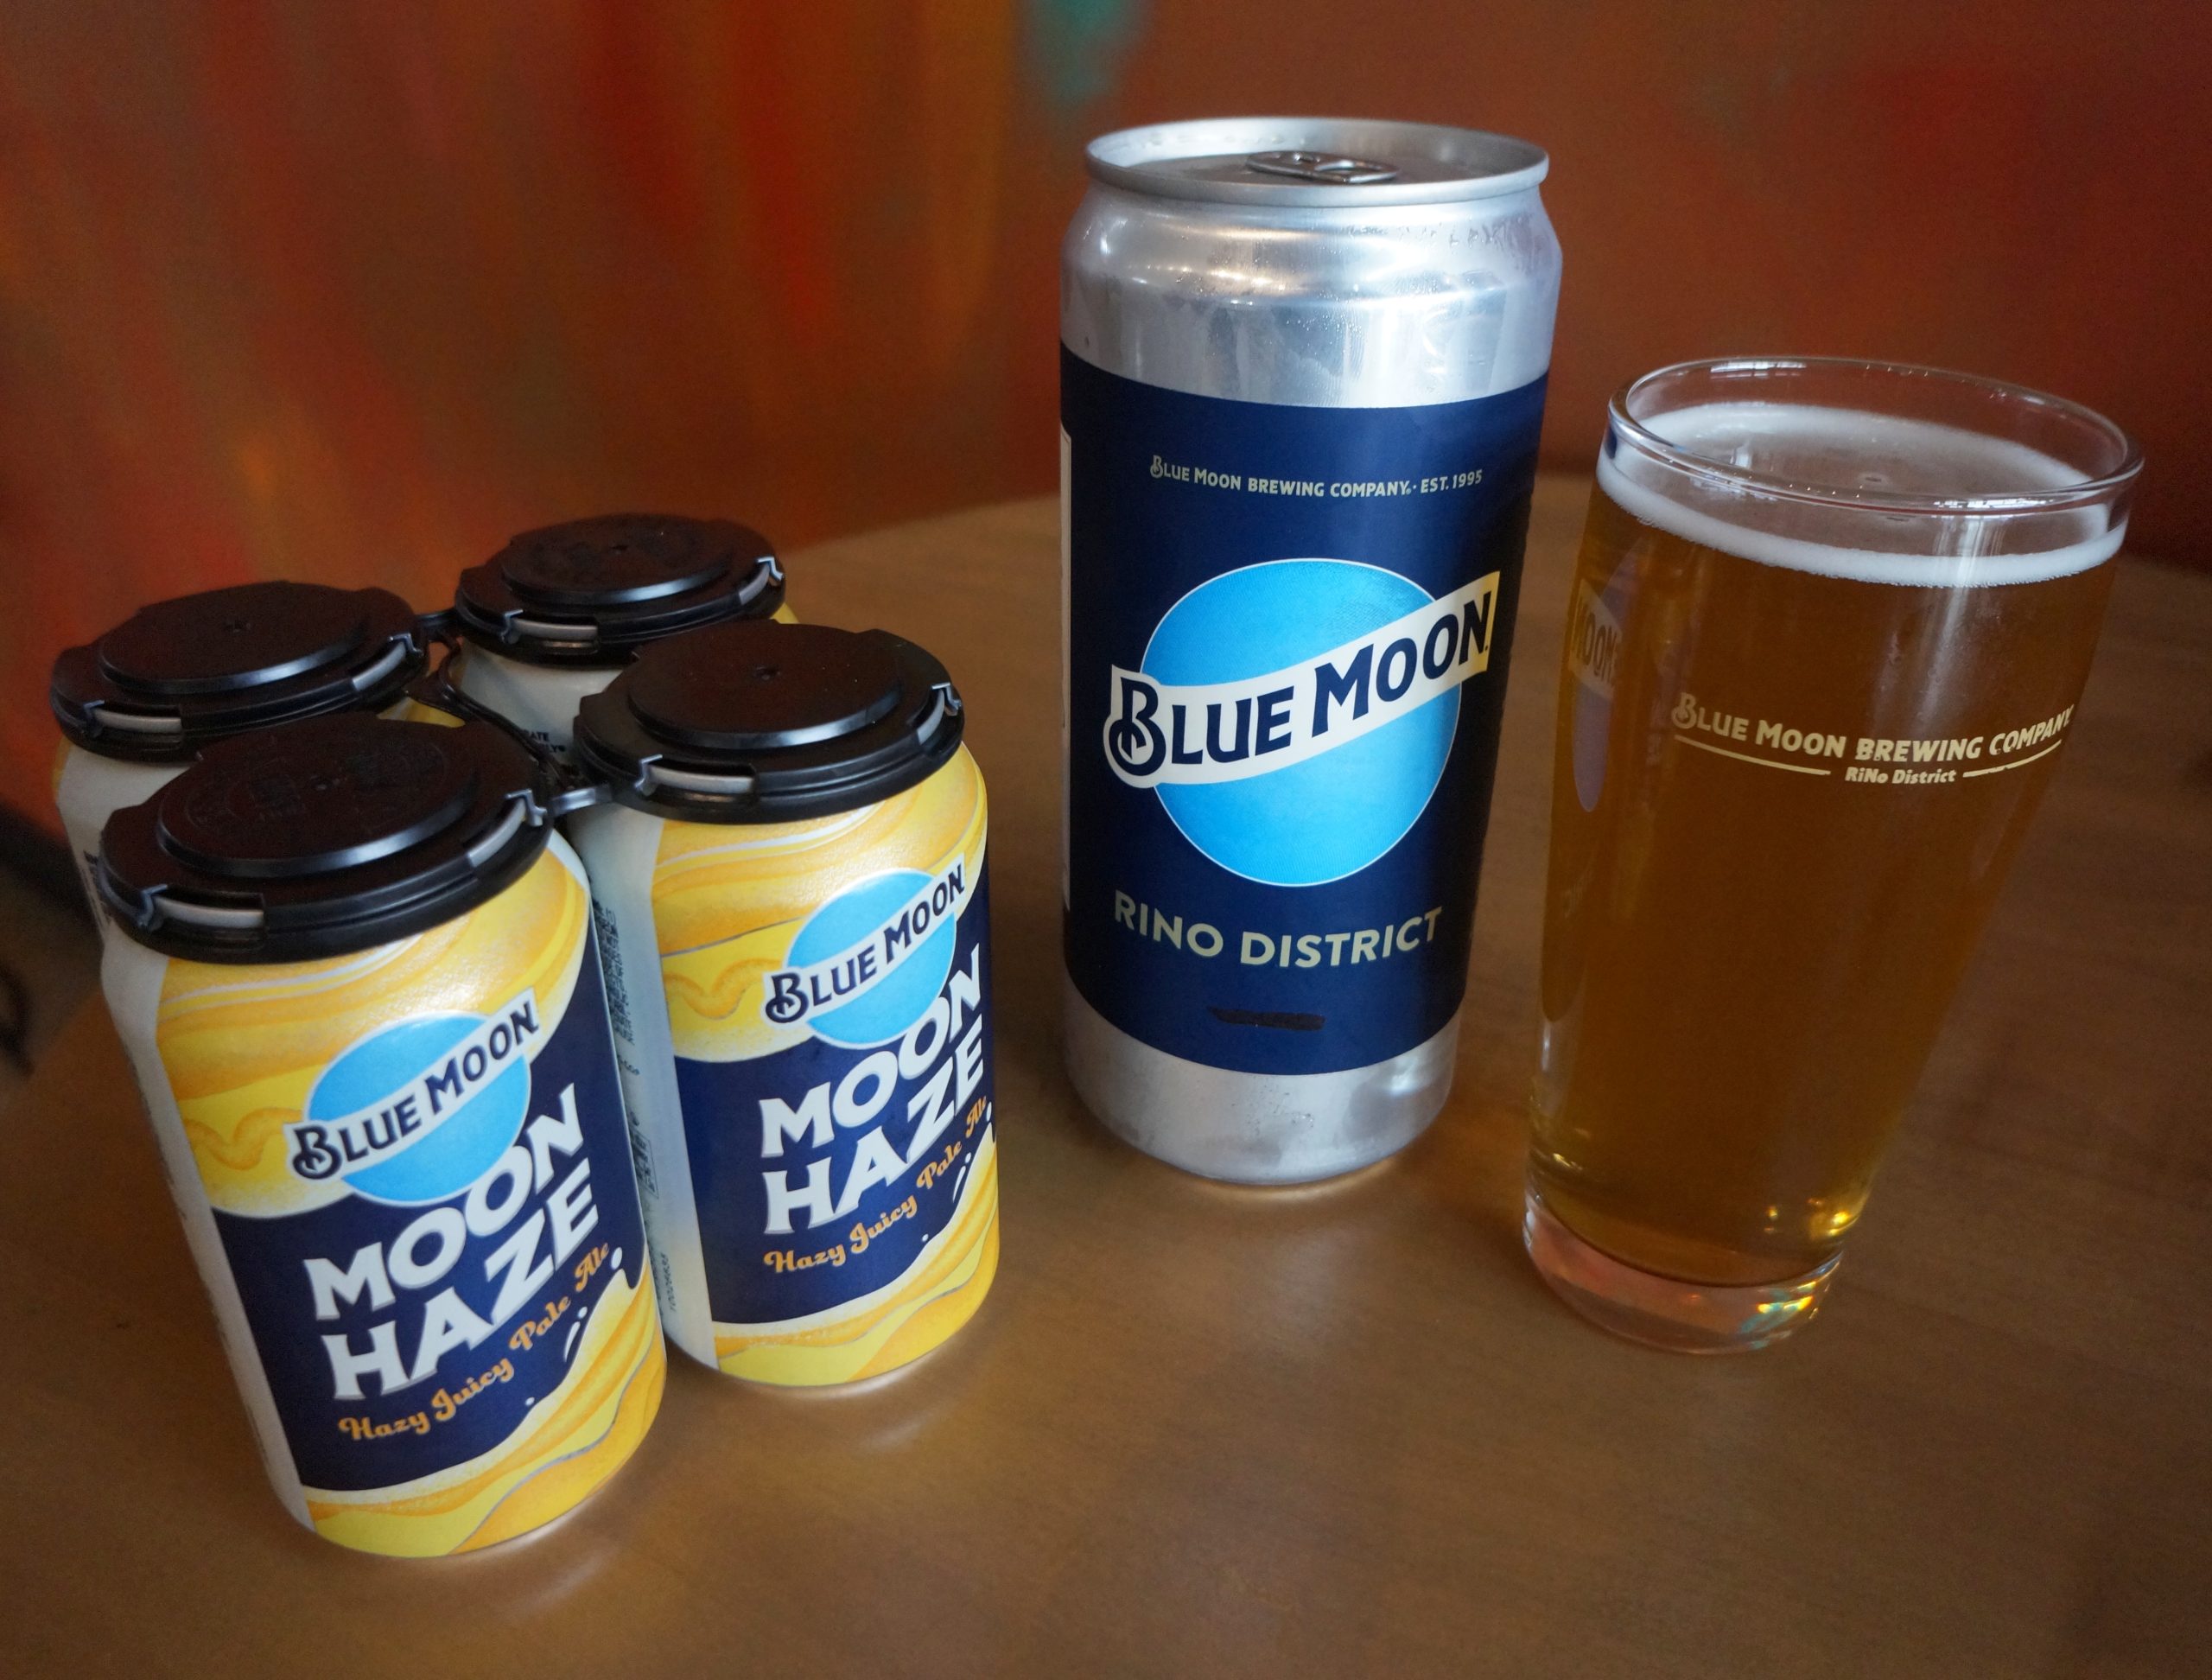 Visiting the Blue Moon Brewery